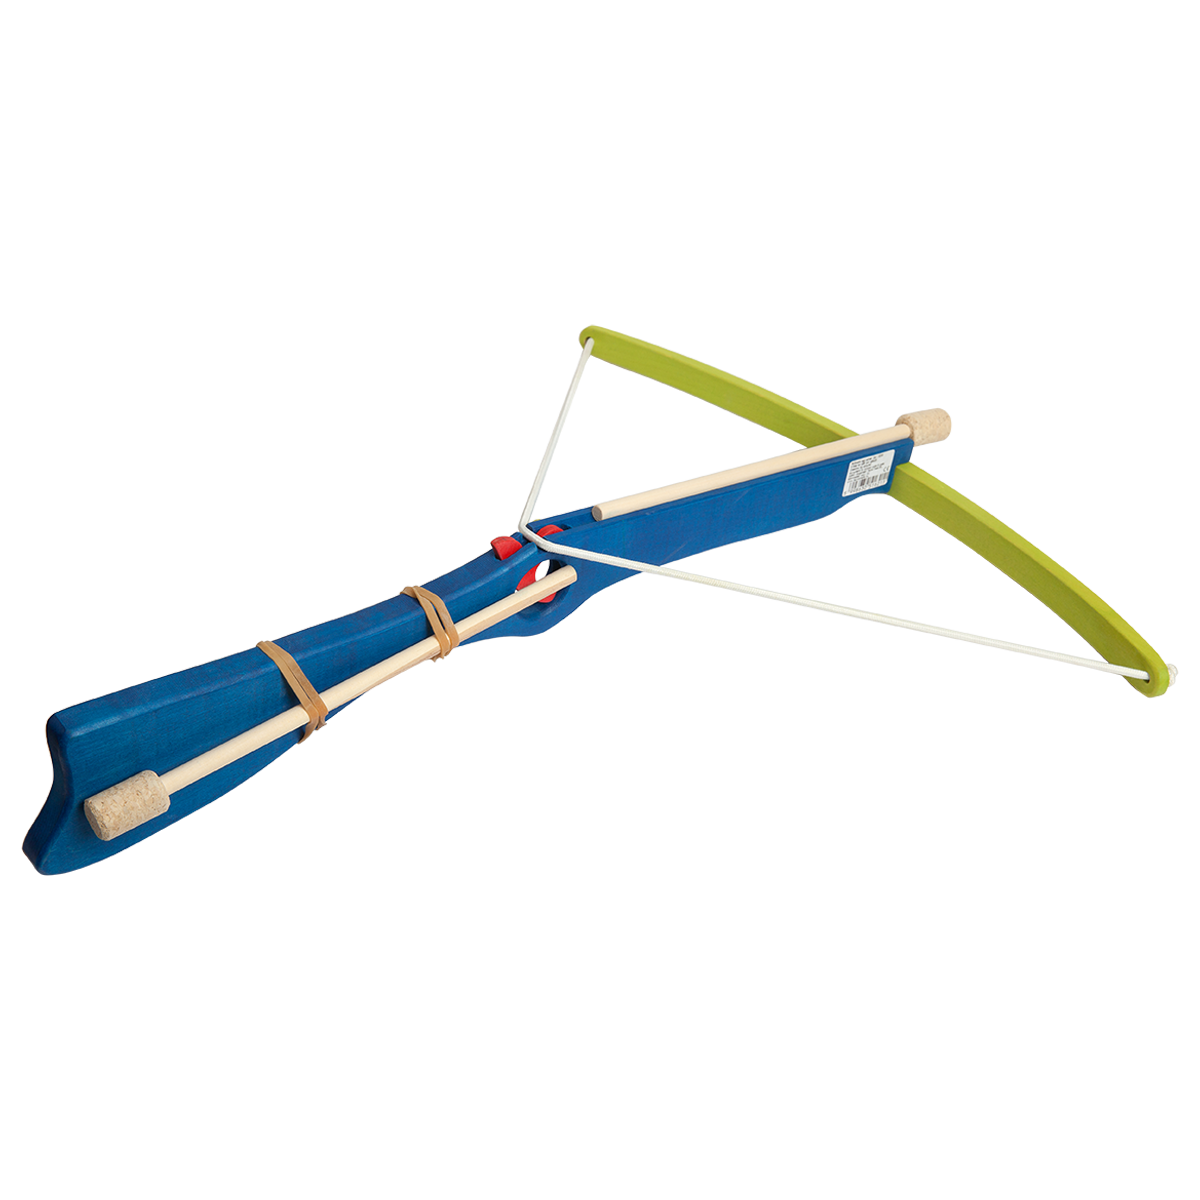 Blue wooden toy crossbow with cork arrows